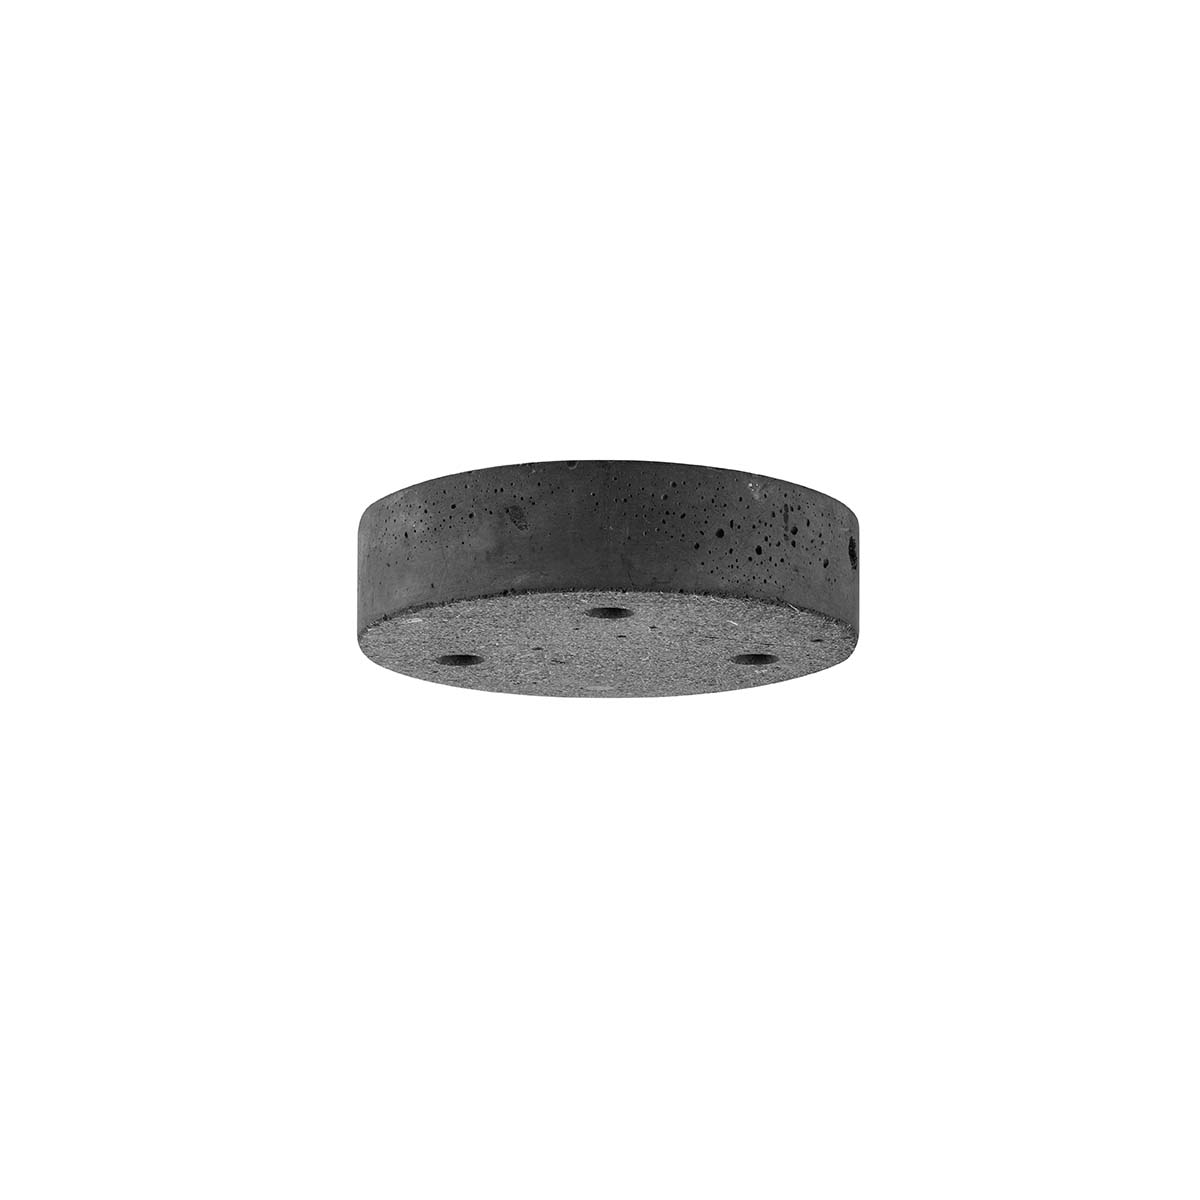 Tangla lighting - TLCP025-03AR - Water stone 3 Lights round canopy stage - anthracite